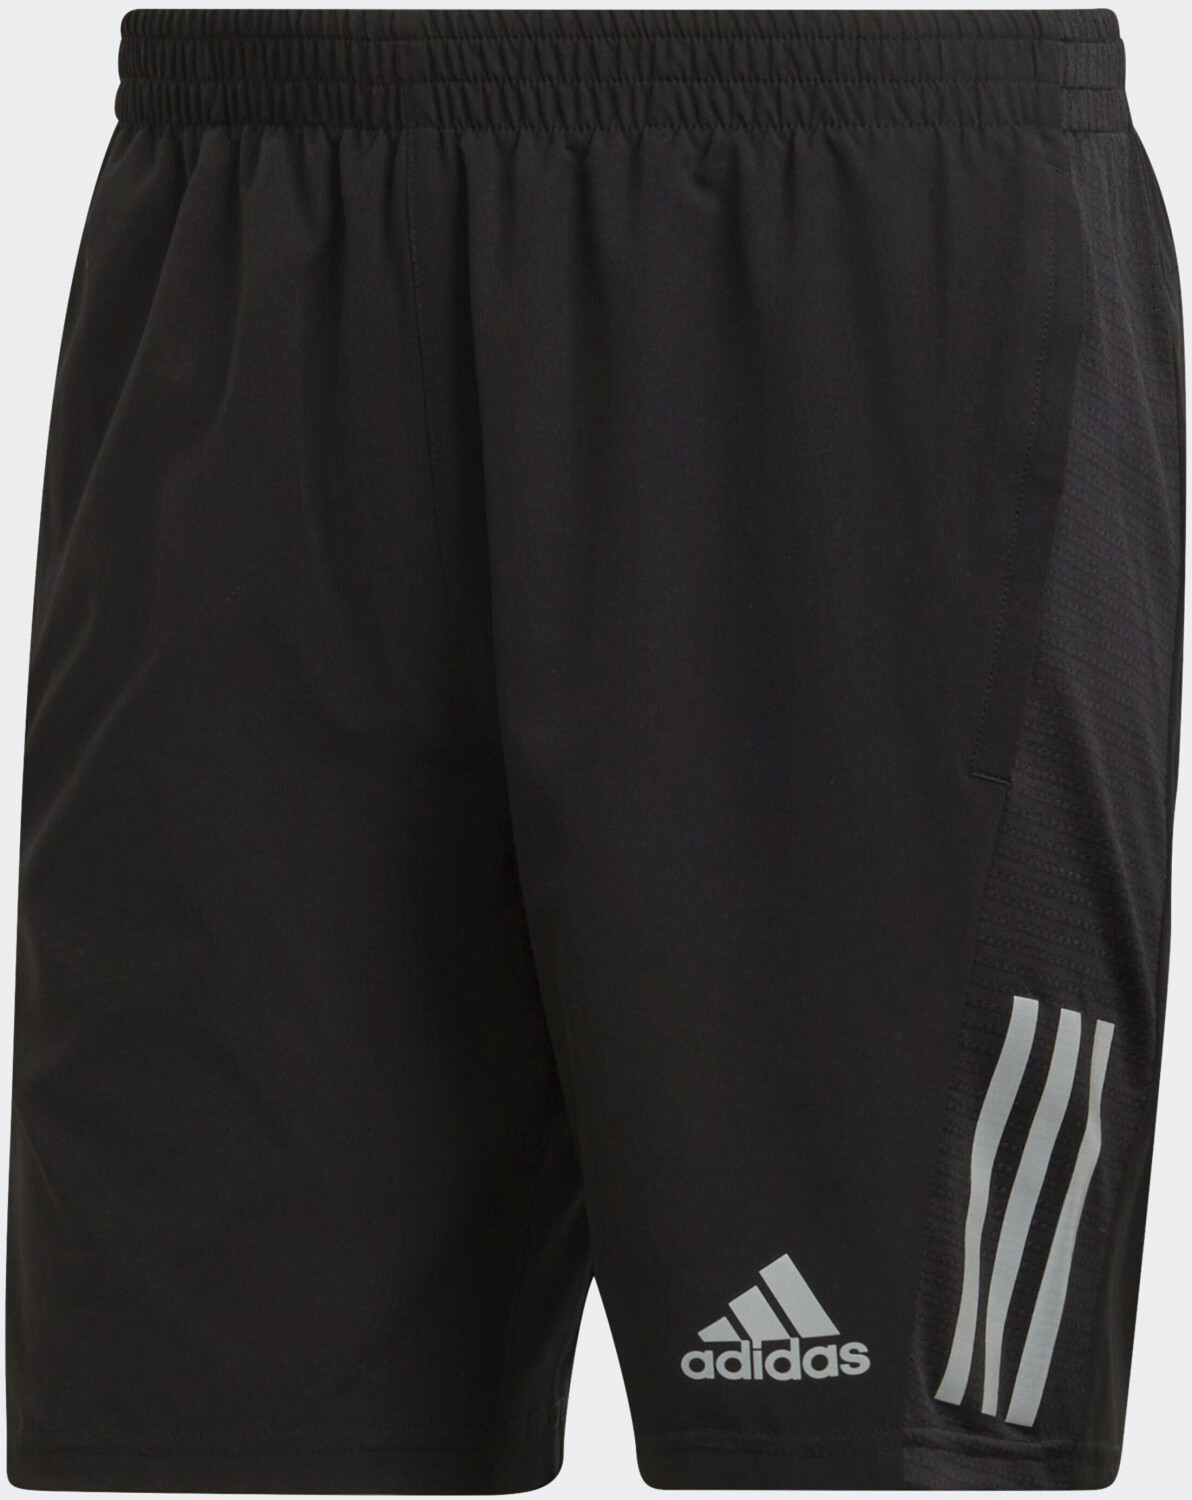 Buy Adidas Own the Run Shorts Men black/reflective silver from £19.99 ...